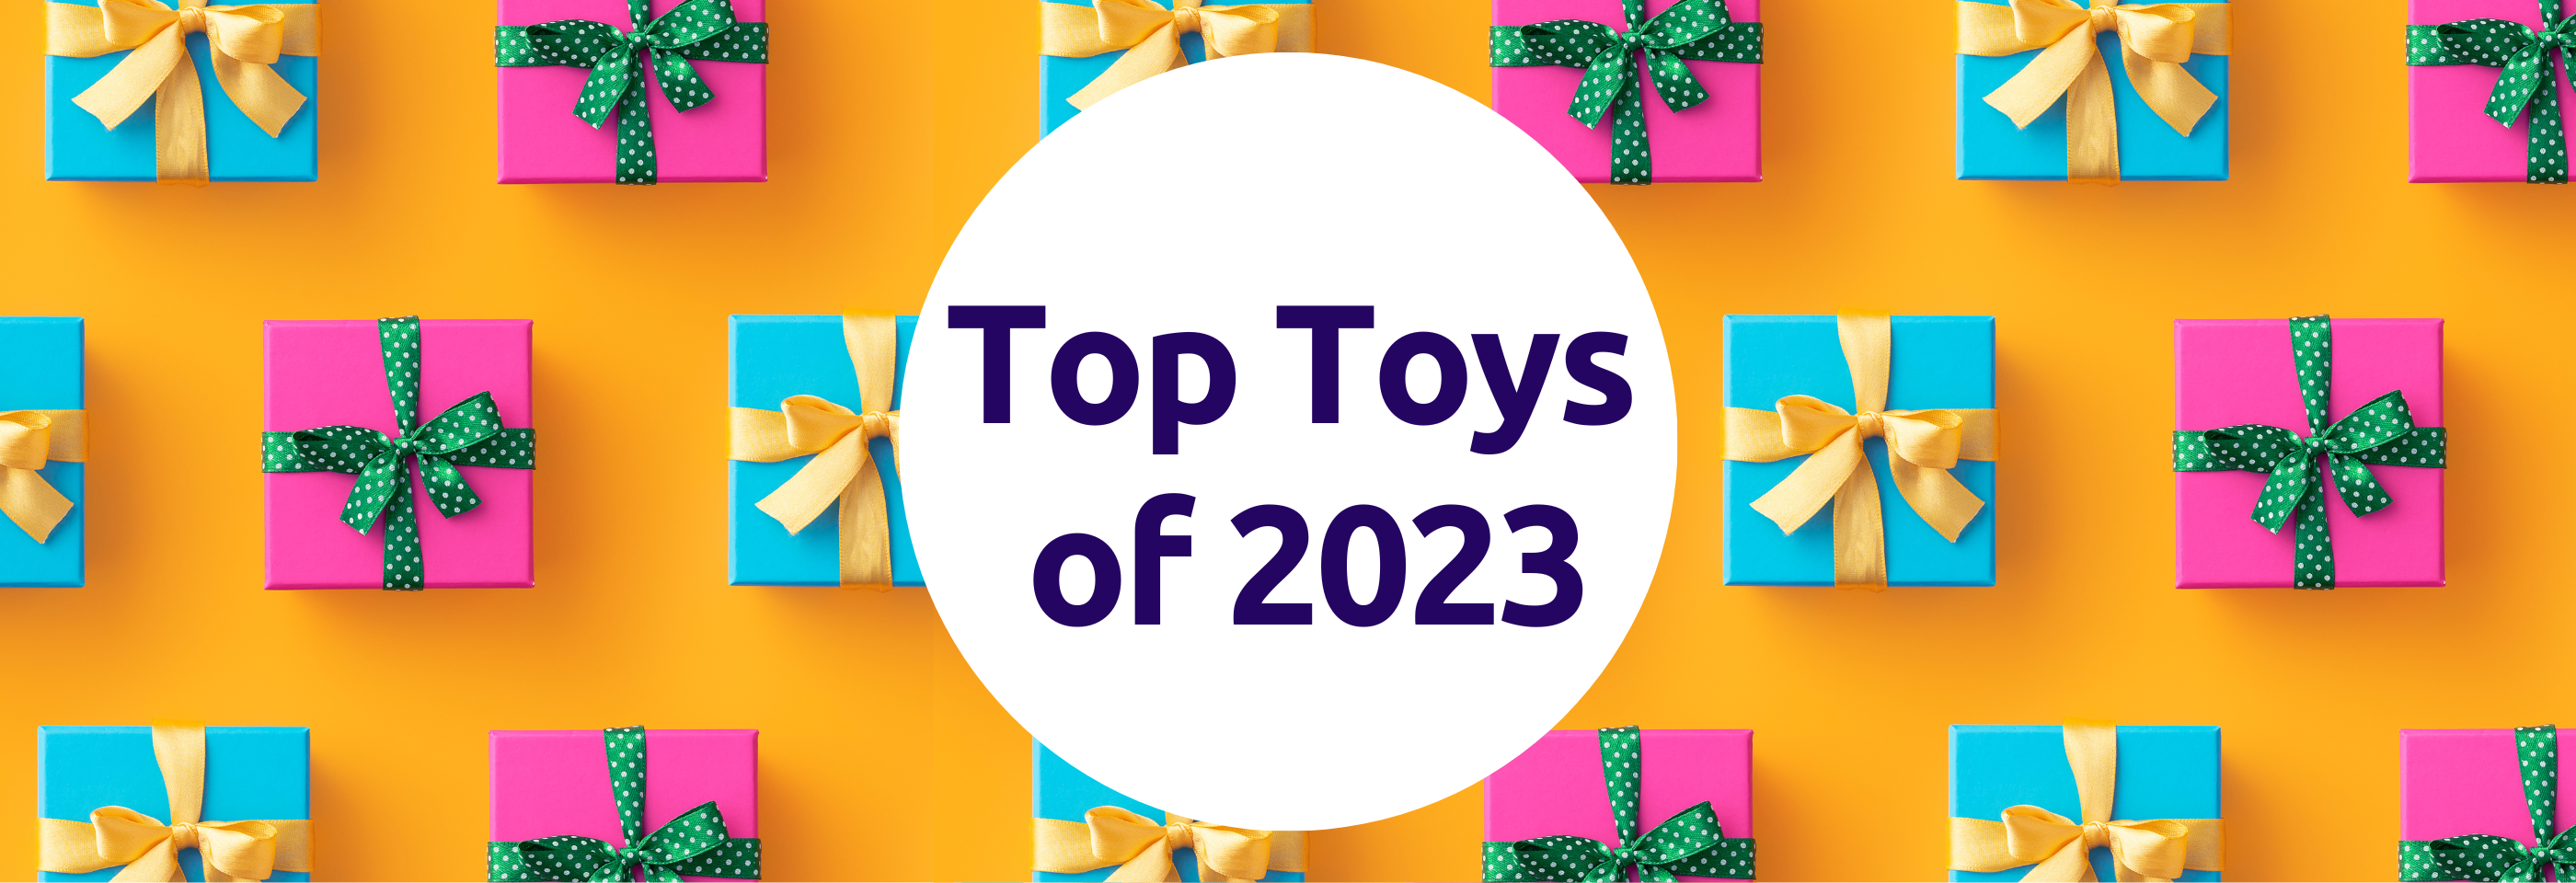 Top Toys Of 2023